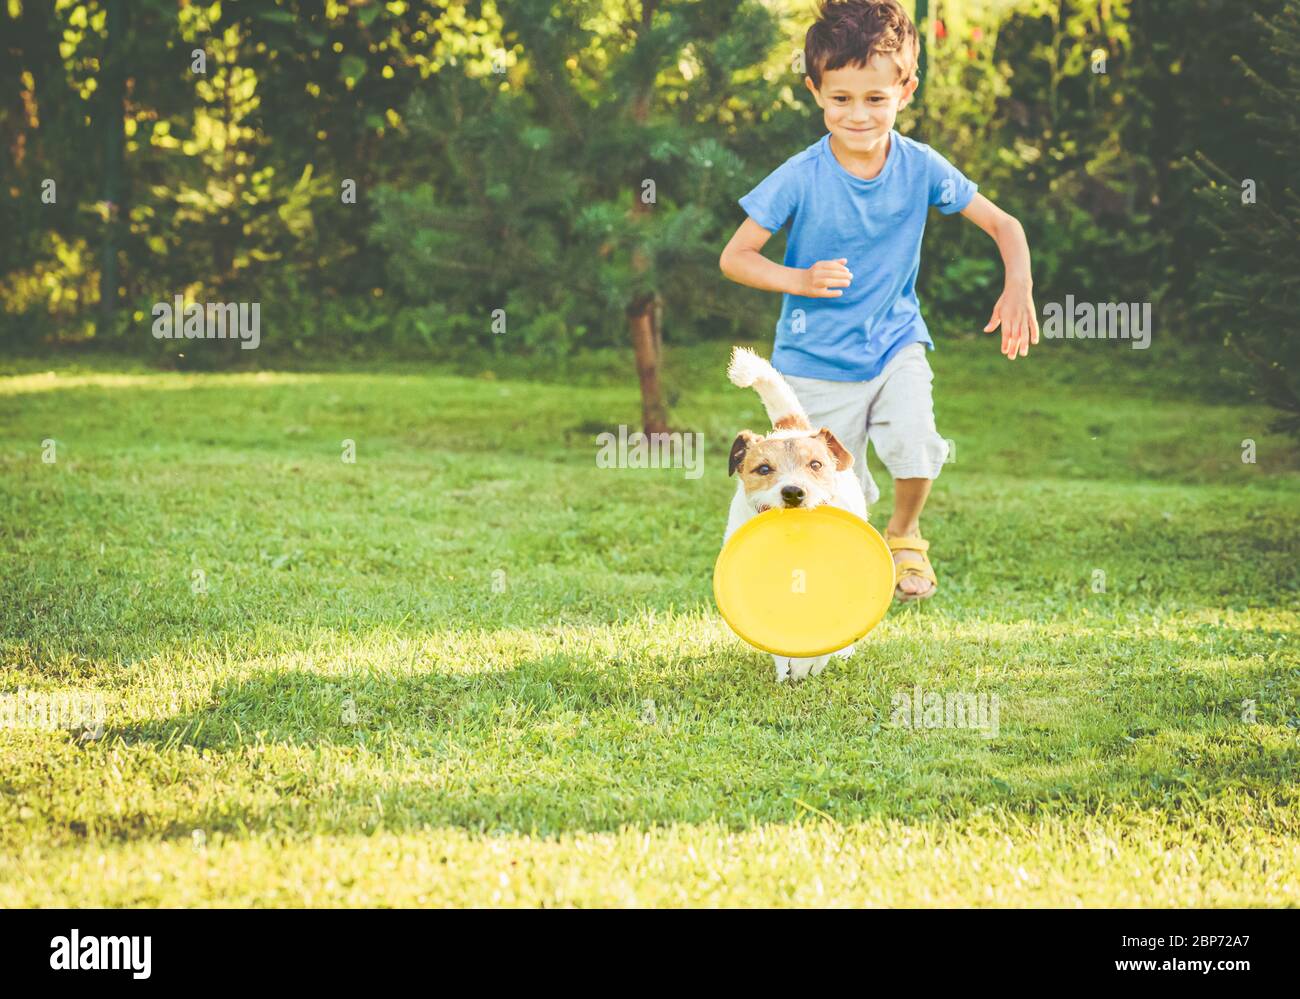 Boy exercises his dog with flying disk to keep it fit in backyard garden Stock Photo